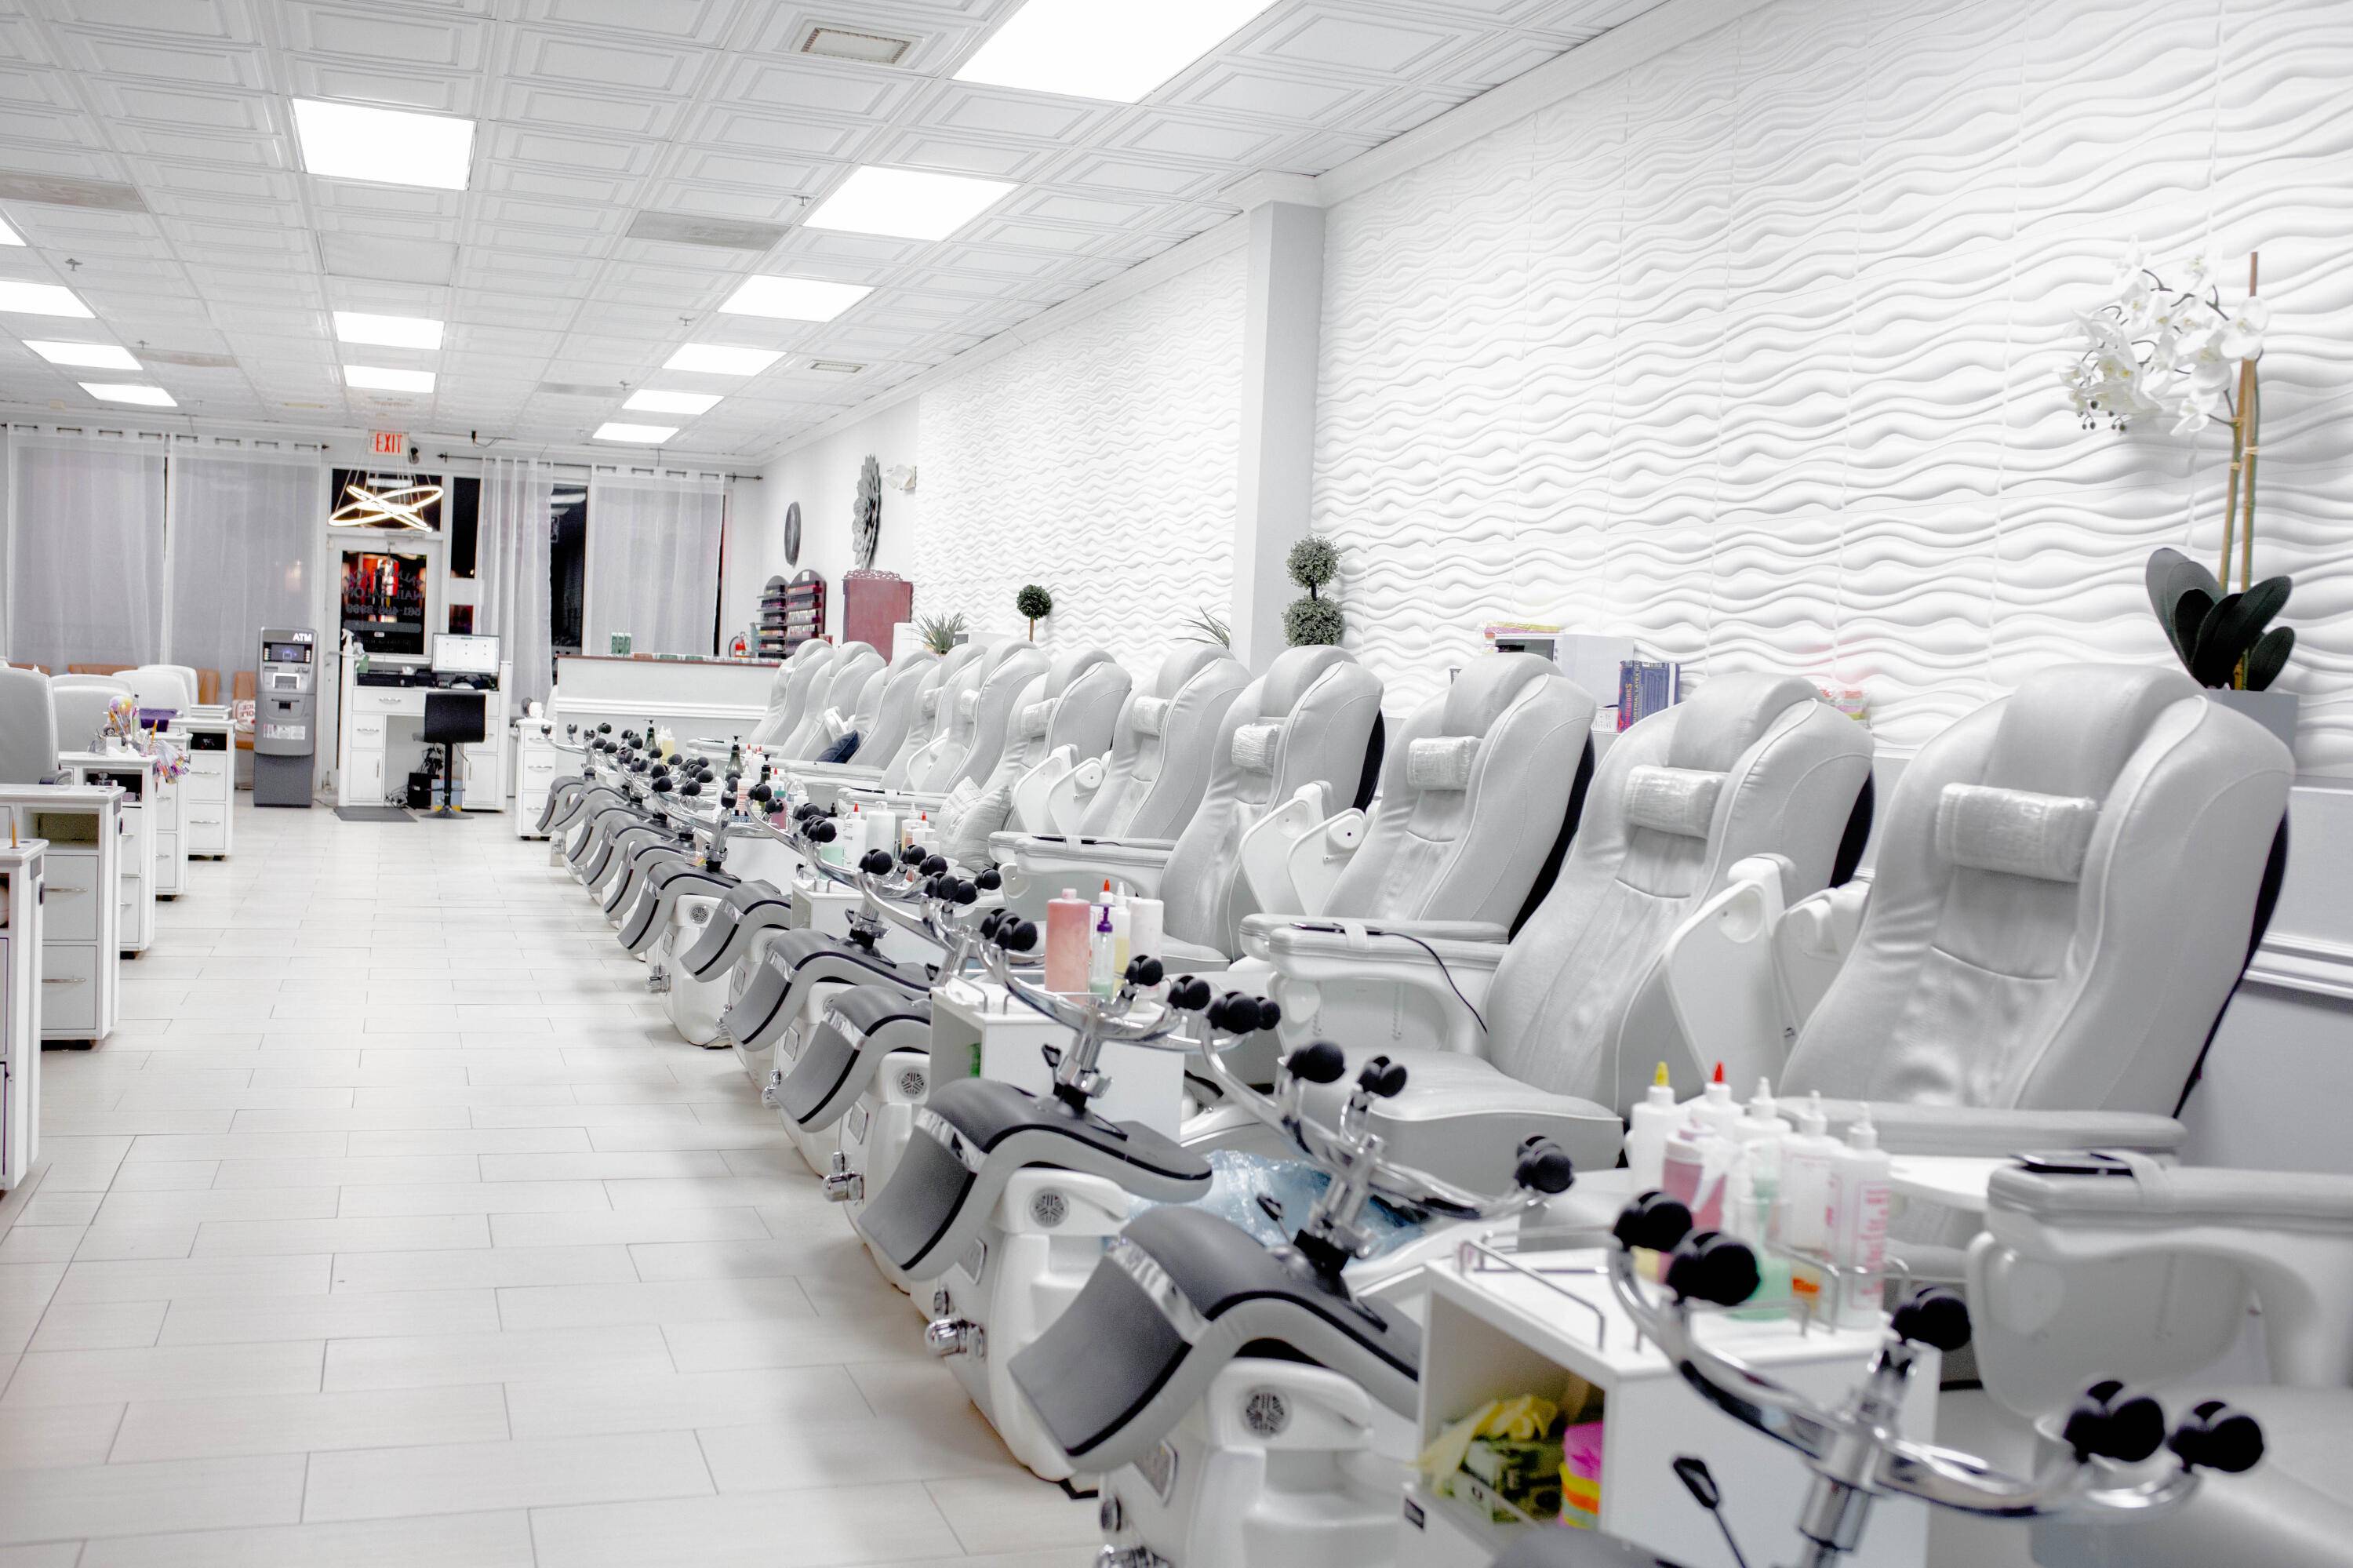 Tremendous opportunity to buy highly sought after nail salon business with tremendous following and unbelievable location.